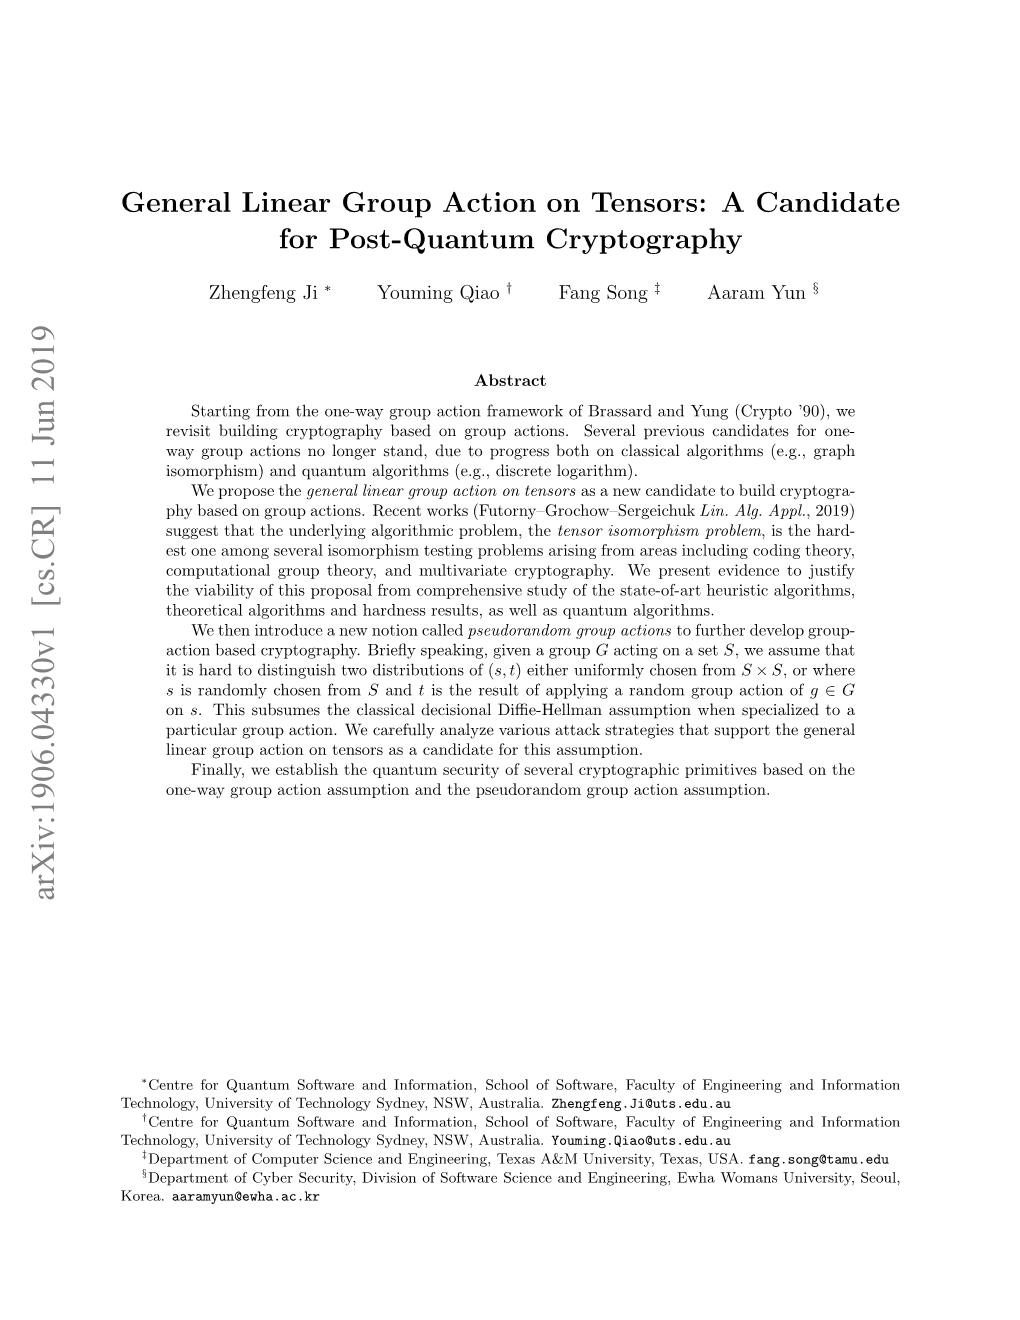 General Linear Group Action on Tensors: a Candidate for Post